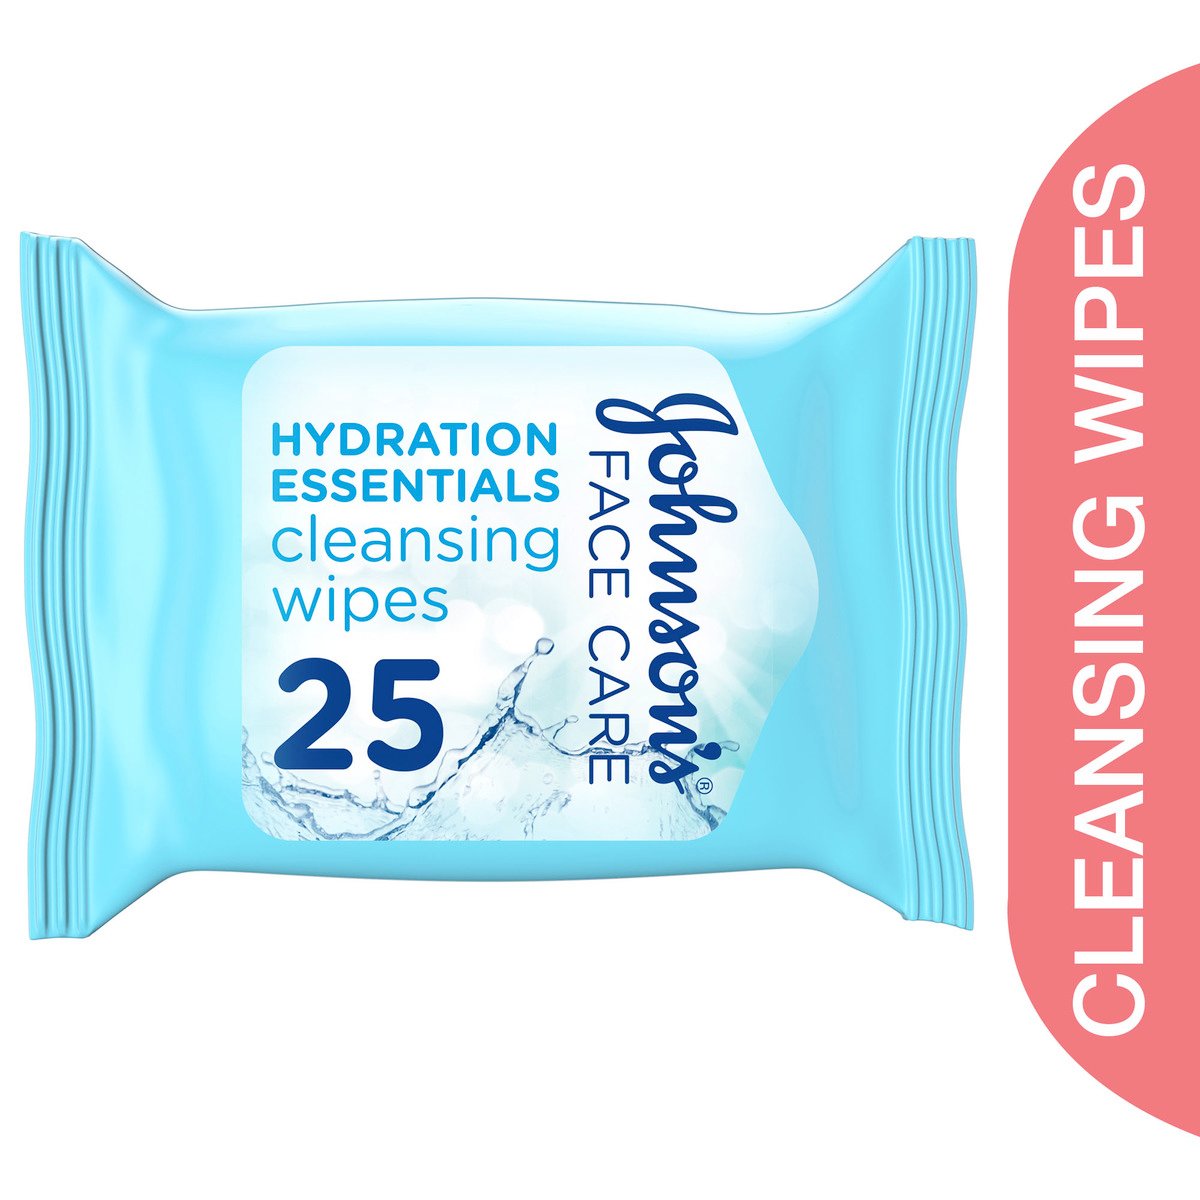 Johnson's Cleansing Wipes Hydration Essentials 25 pcs